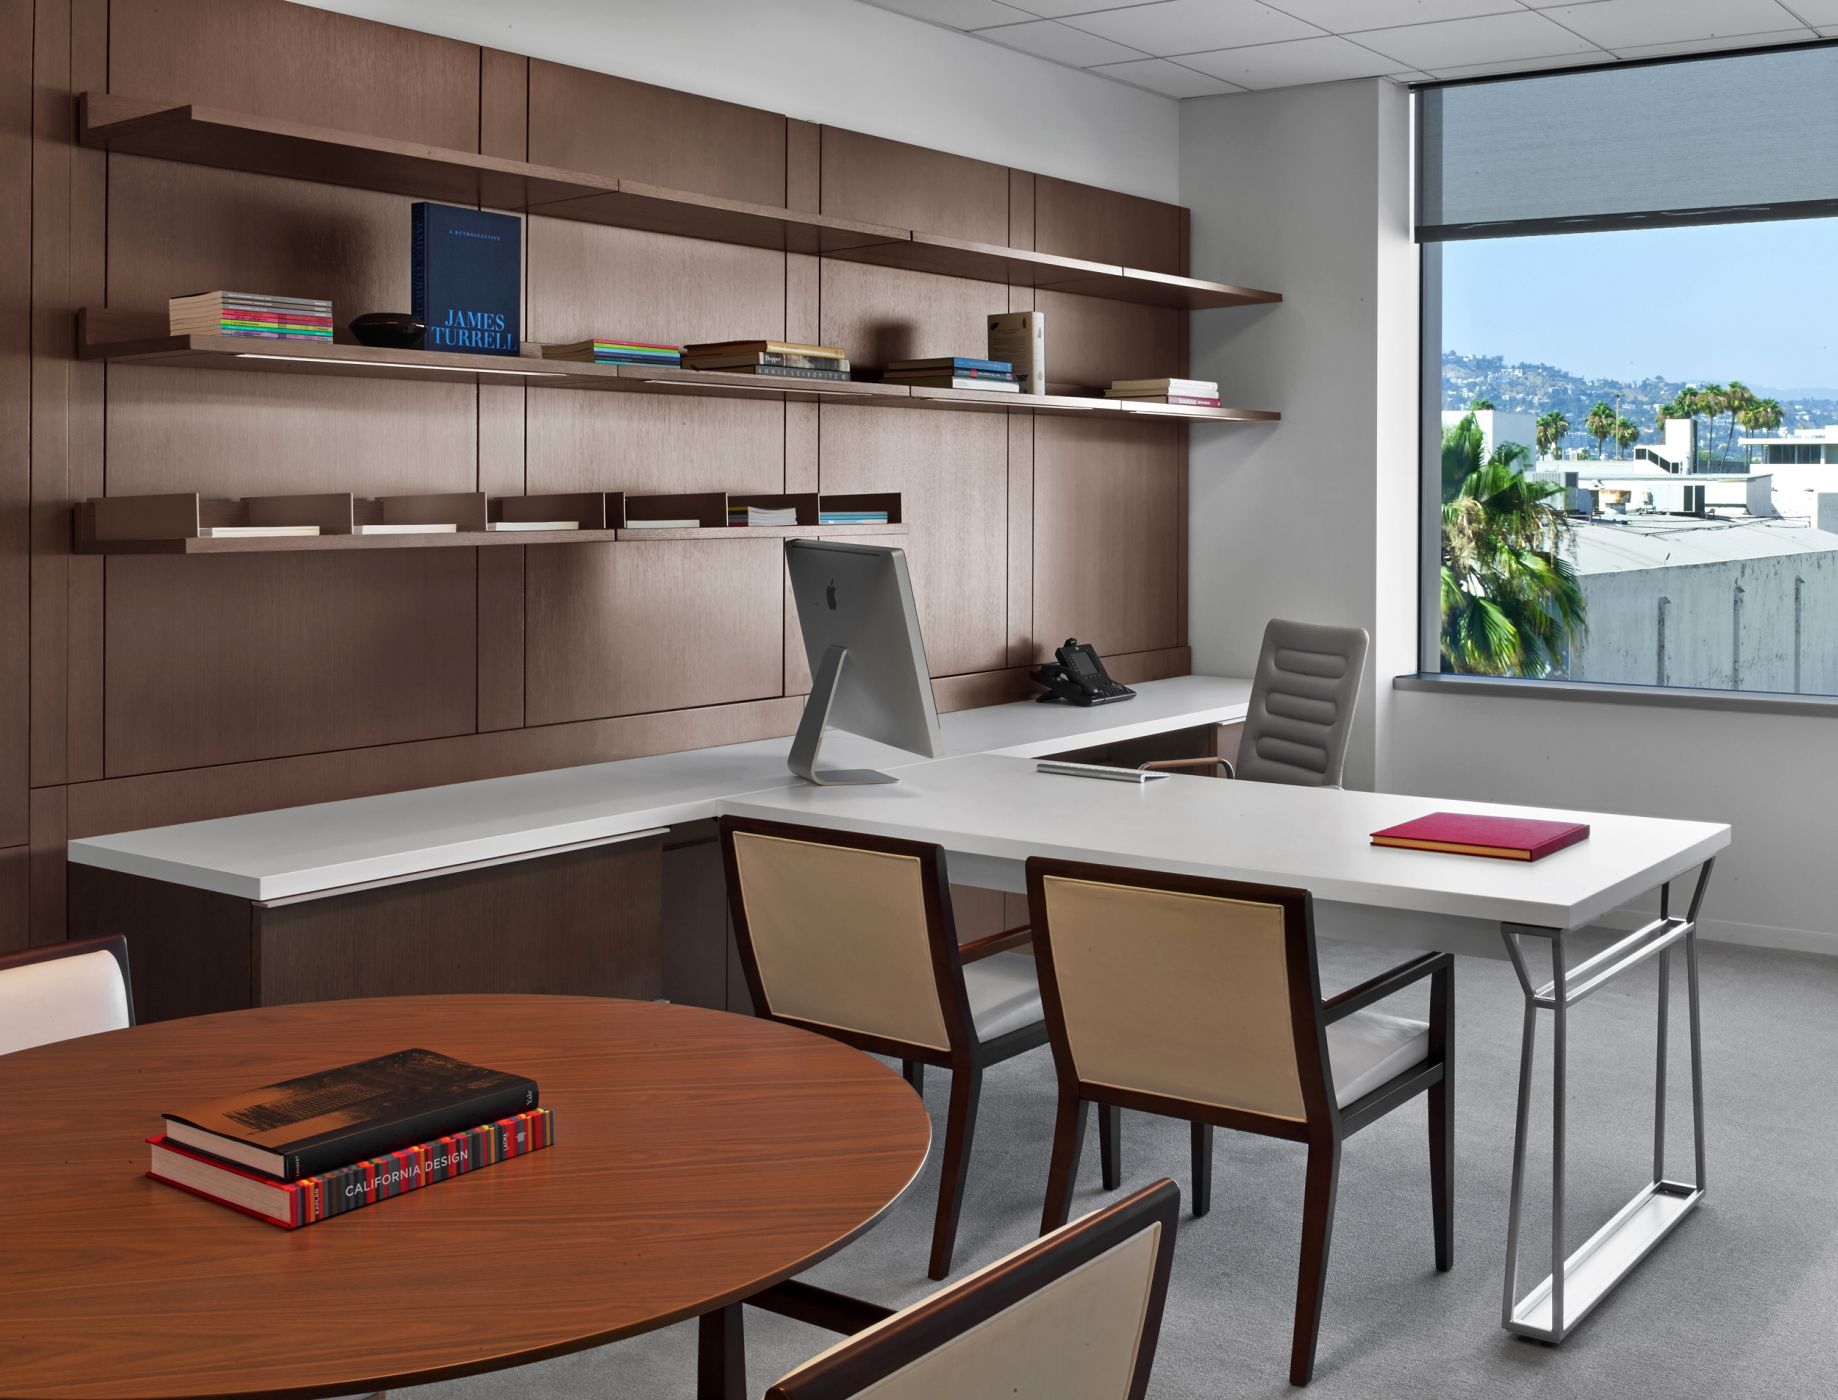 Private offices feature rift oak workwalls, Smoky White laminate surfaces, and brushed aluminum hardware.